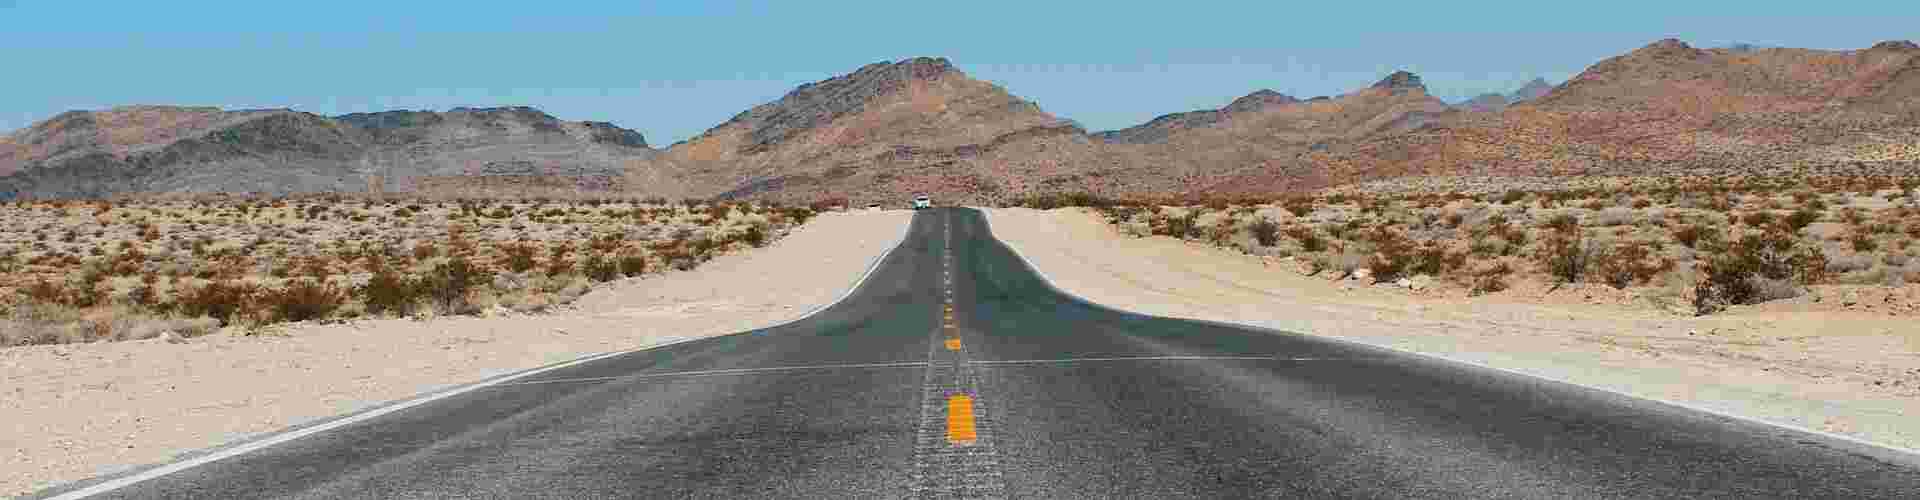 An empty road through Death Valley National Park in California